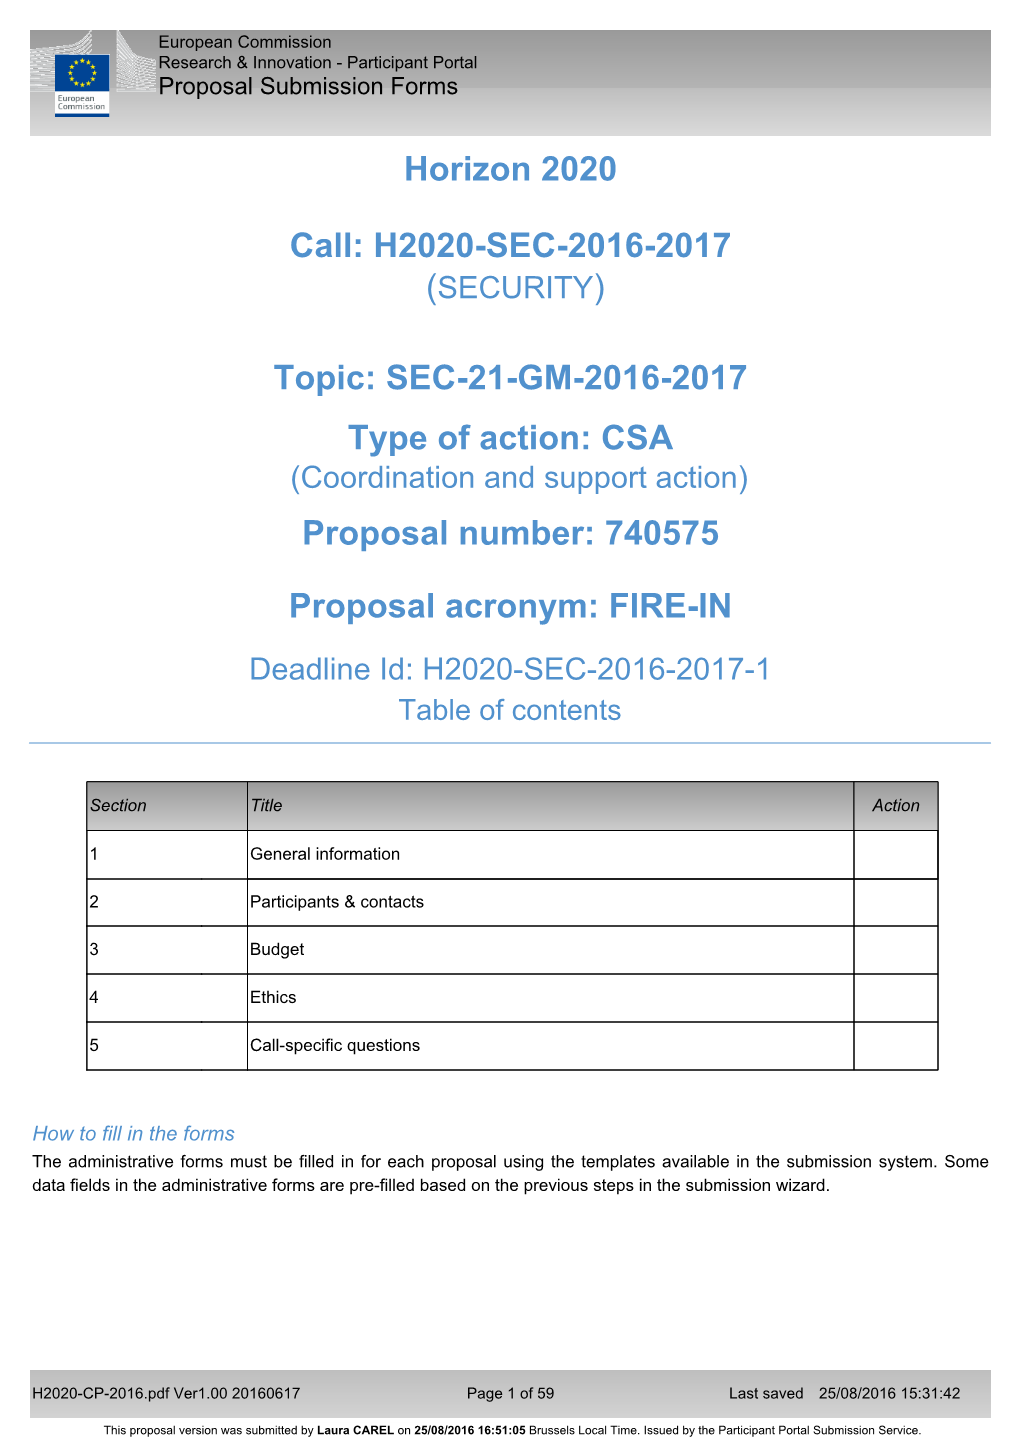 Proposal Acronym: FIRE-IN Deadline Id: H2020-SEC-2016-2017-1 Table of Contents